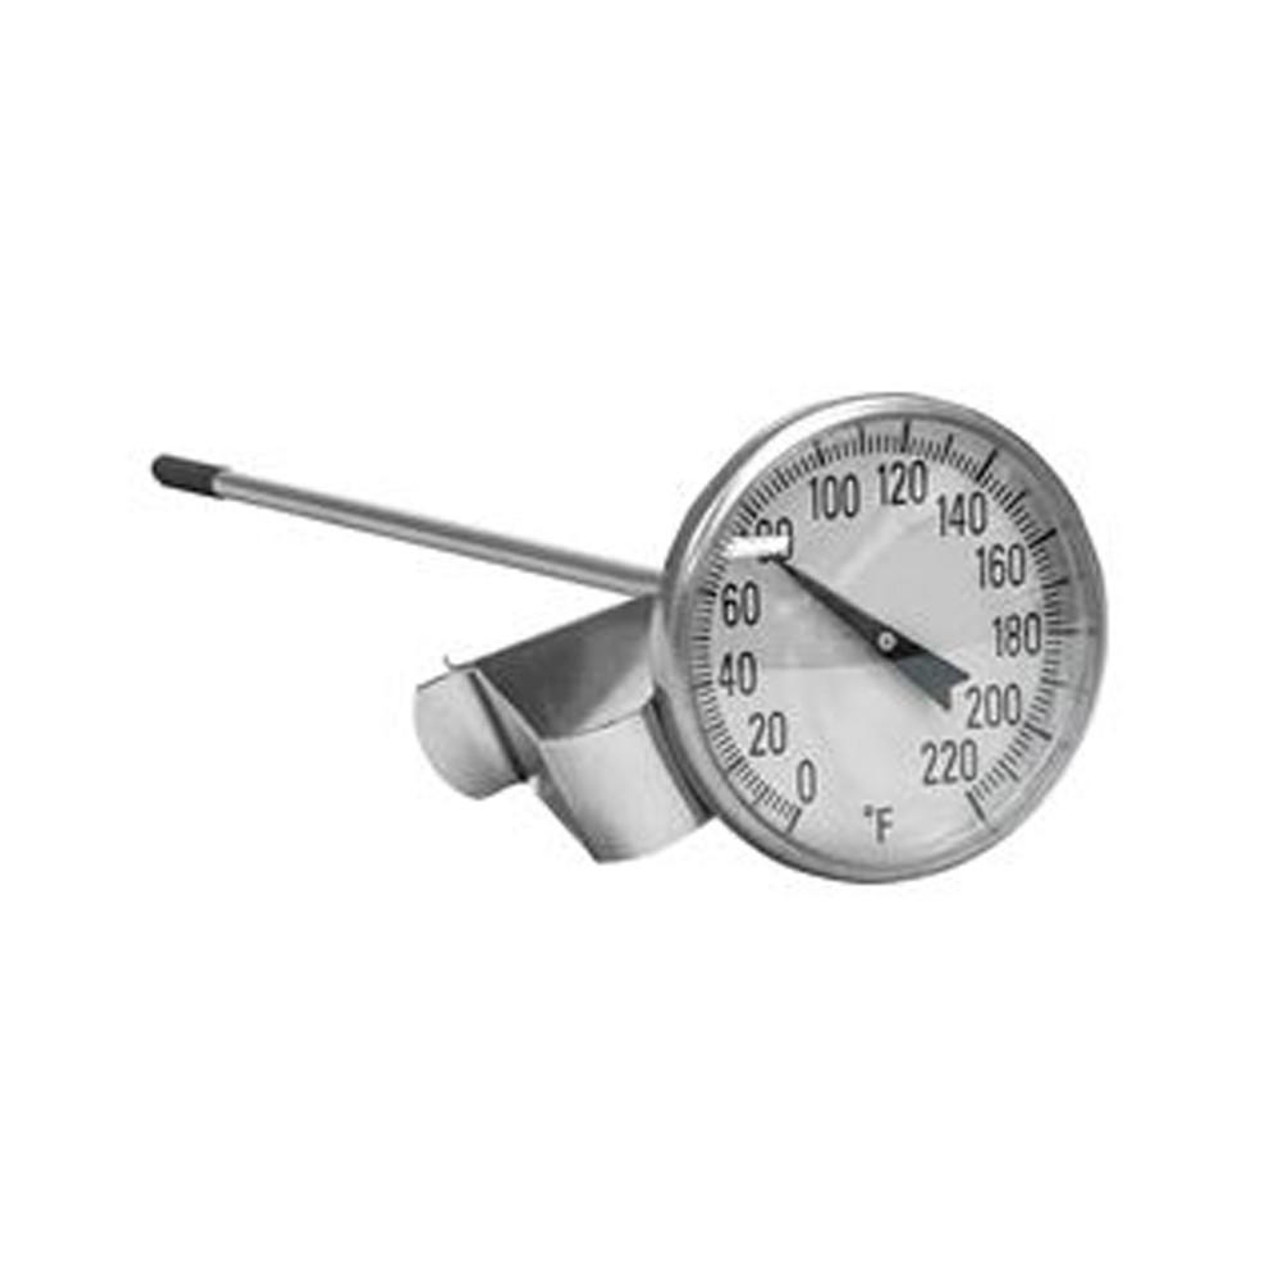 Pocket Dial Concrete Thermometer, 25 to 125F, 5in Stem, 1in Dial